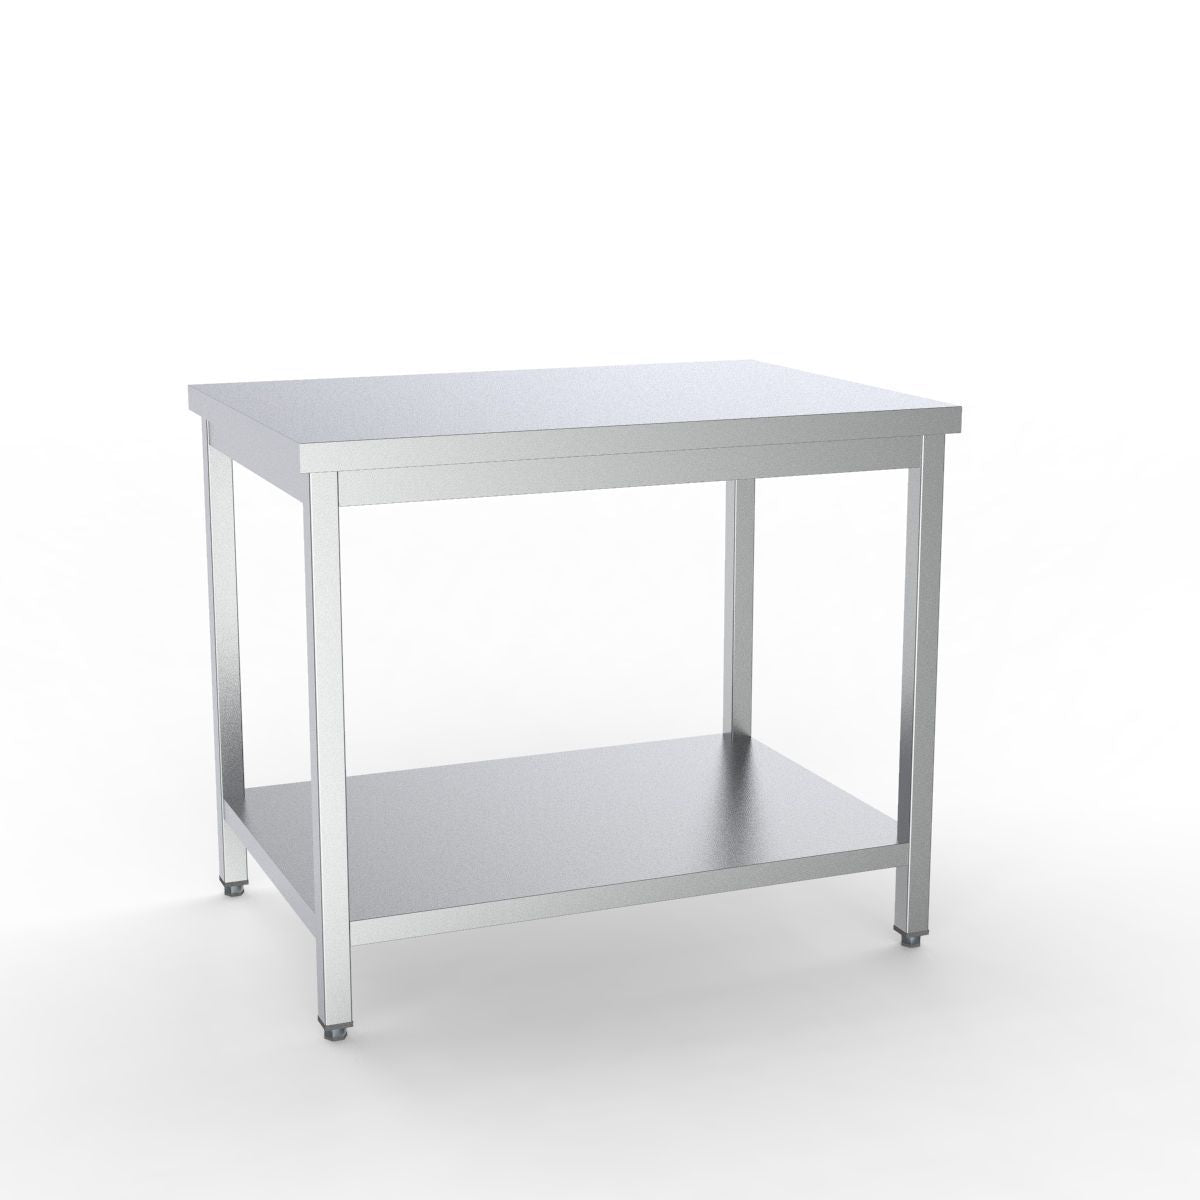 Combisteel Full 430 Stainless Steel 600 Line Worktable With Shelf 1600mm Wide - 7333.0070